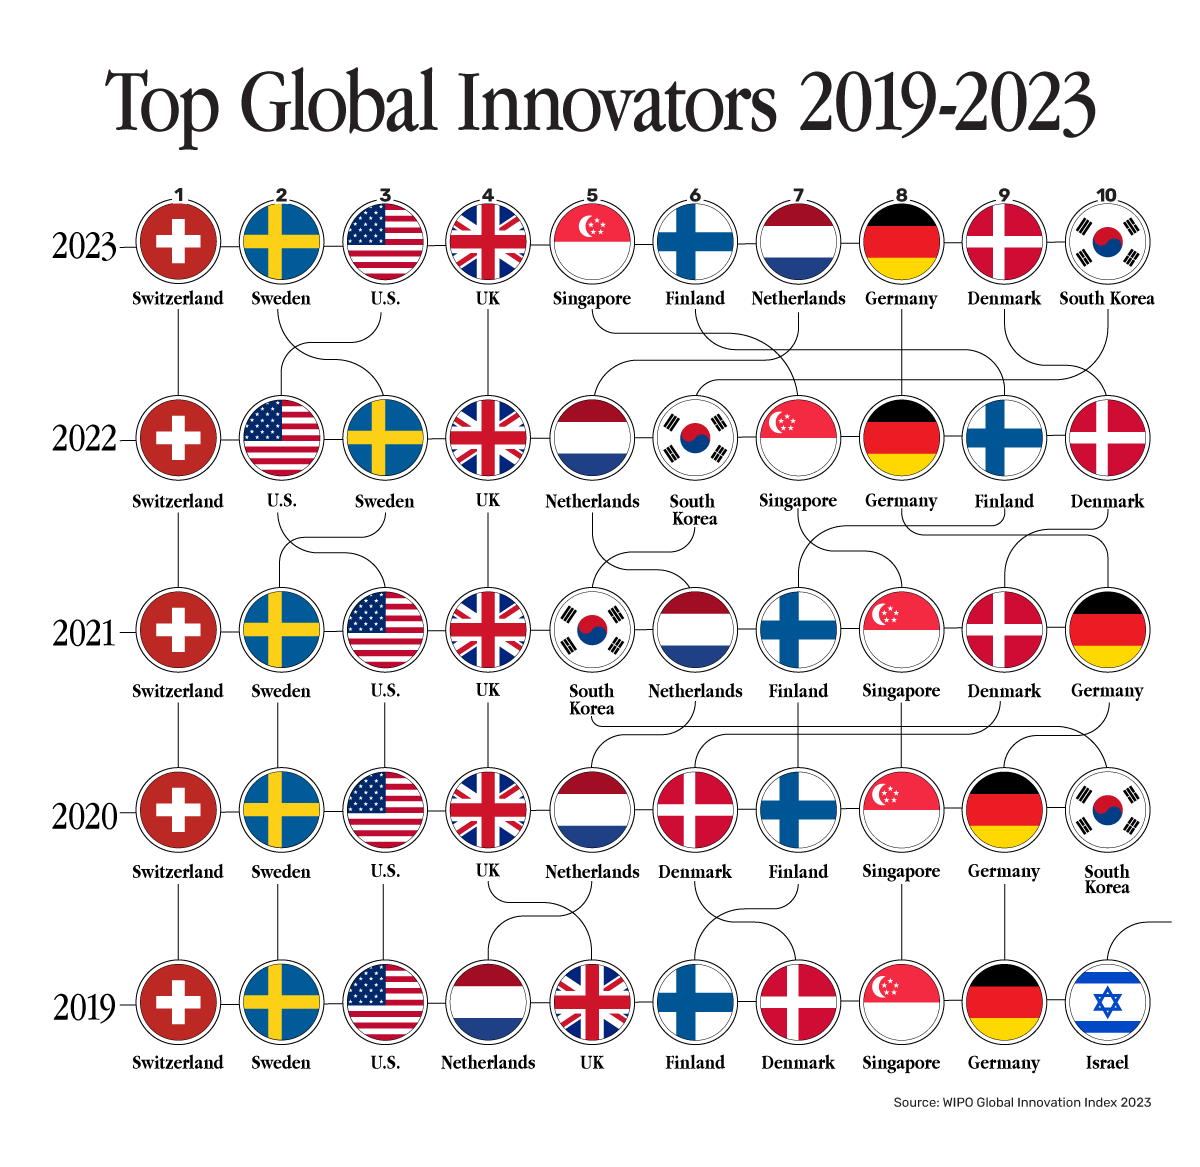 Most Innovative Countries 2019 to 2023